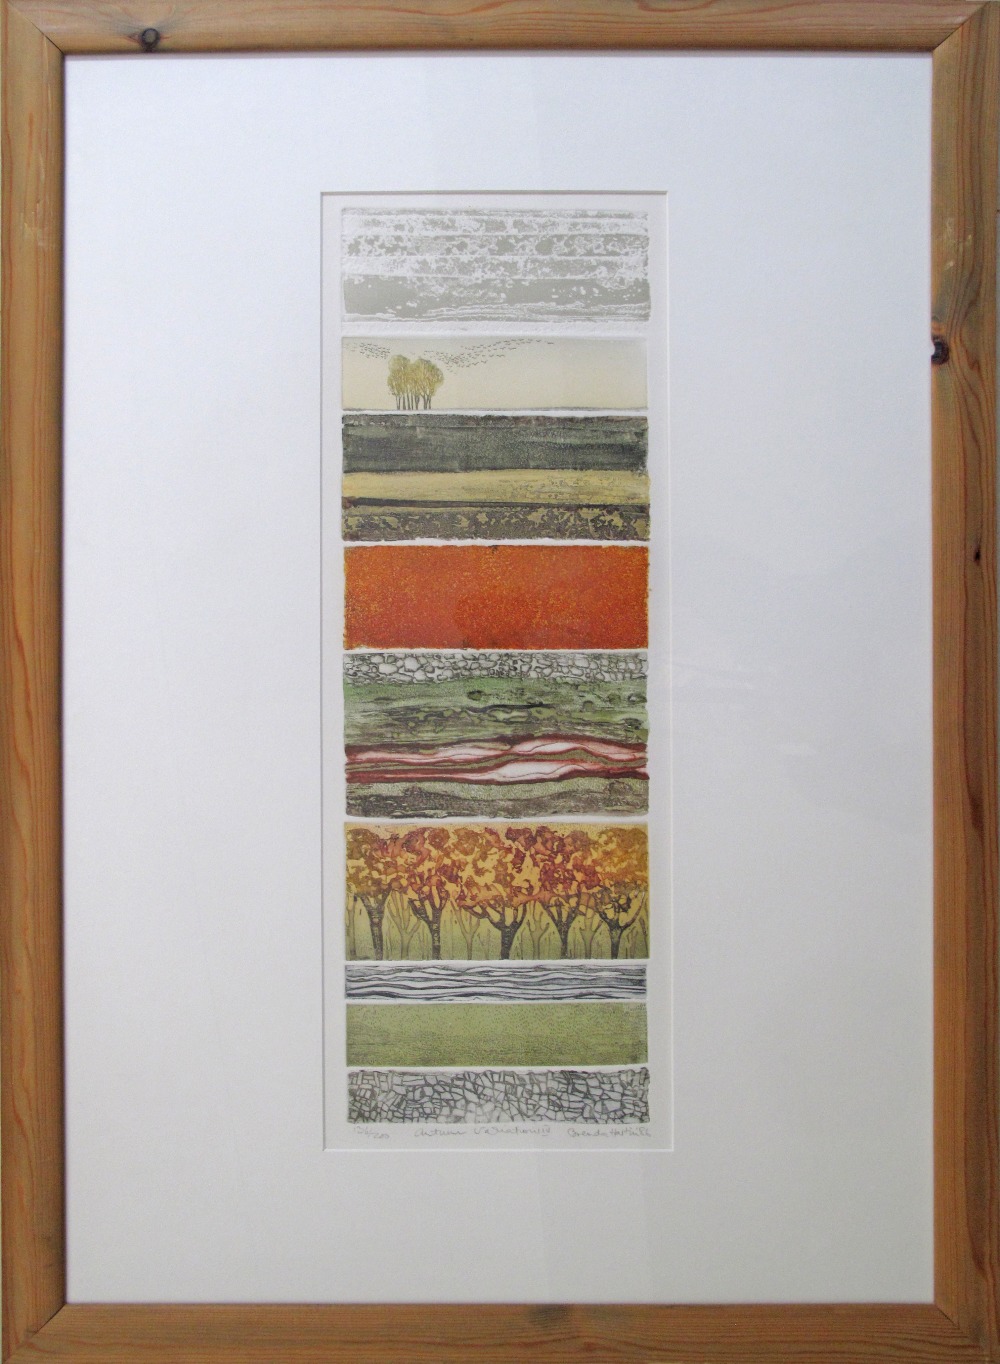 Brenda Hartill (British), Autumn variations, etching in colour, signed and numbered 136/200, 1986.